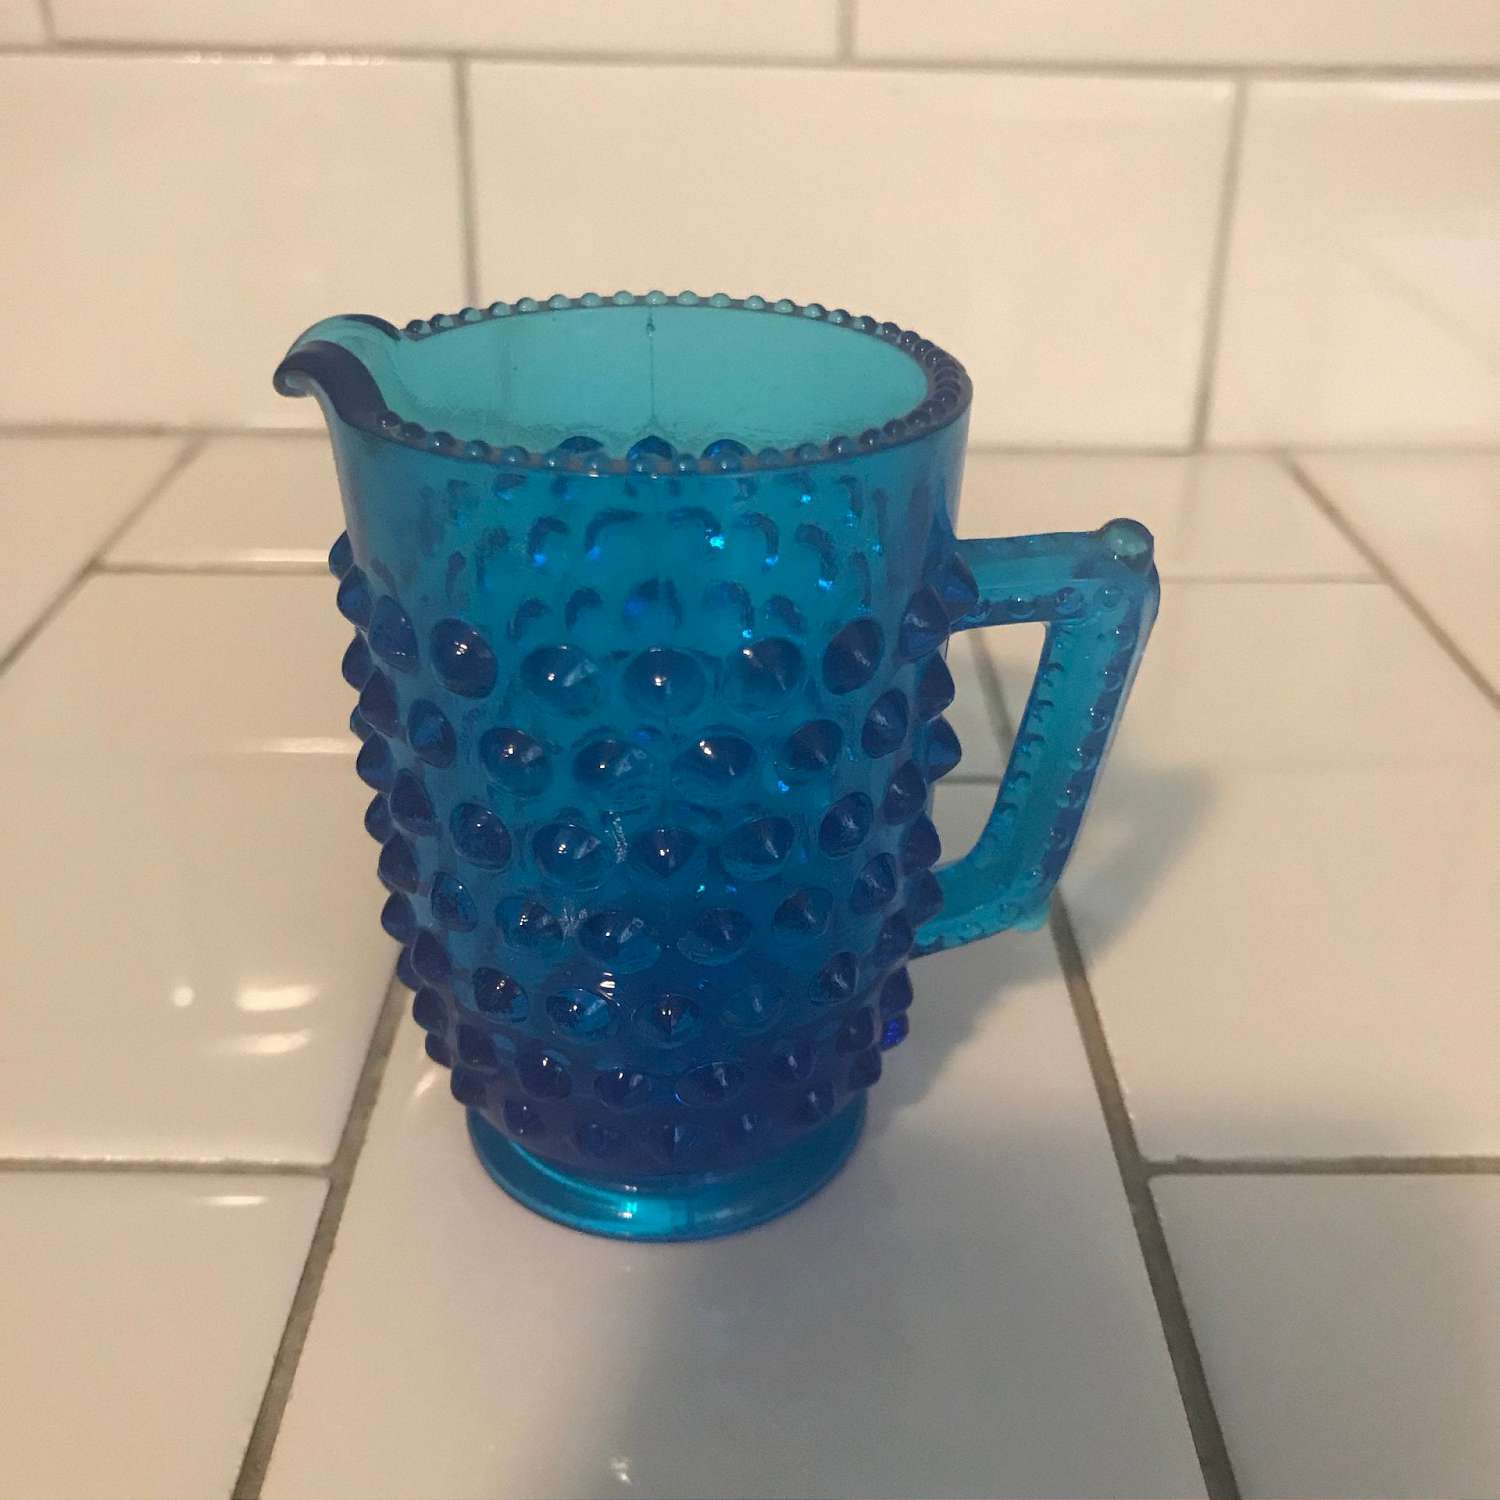 https://www.truevintageantiques.com/wp-content/uploads/2019/12/vintage-cream-pitcher-creamer-hobnail-glass-with-hobnail-handle-rim-and-base-dark-aqua-blue-farmhouse-collectible-display-gold-trim-5df97f791-scaled.jpg